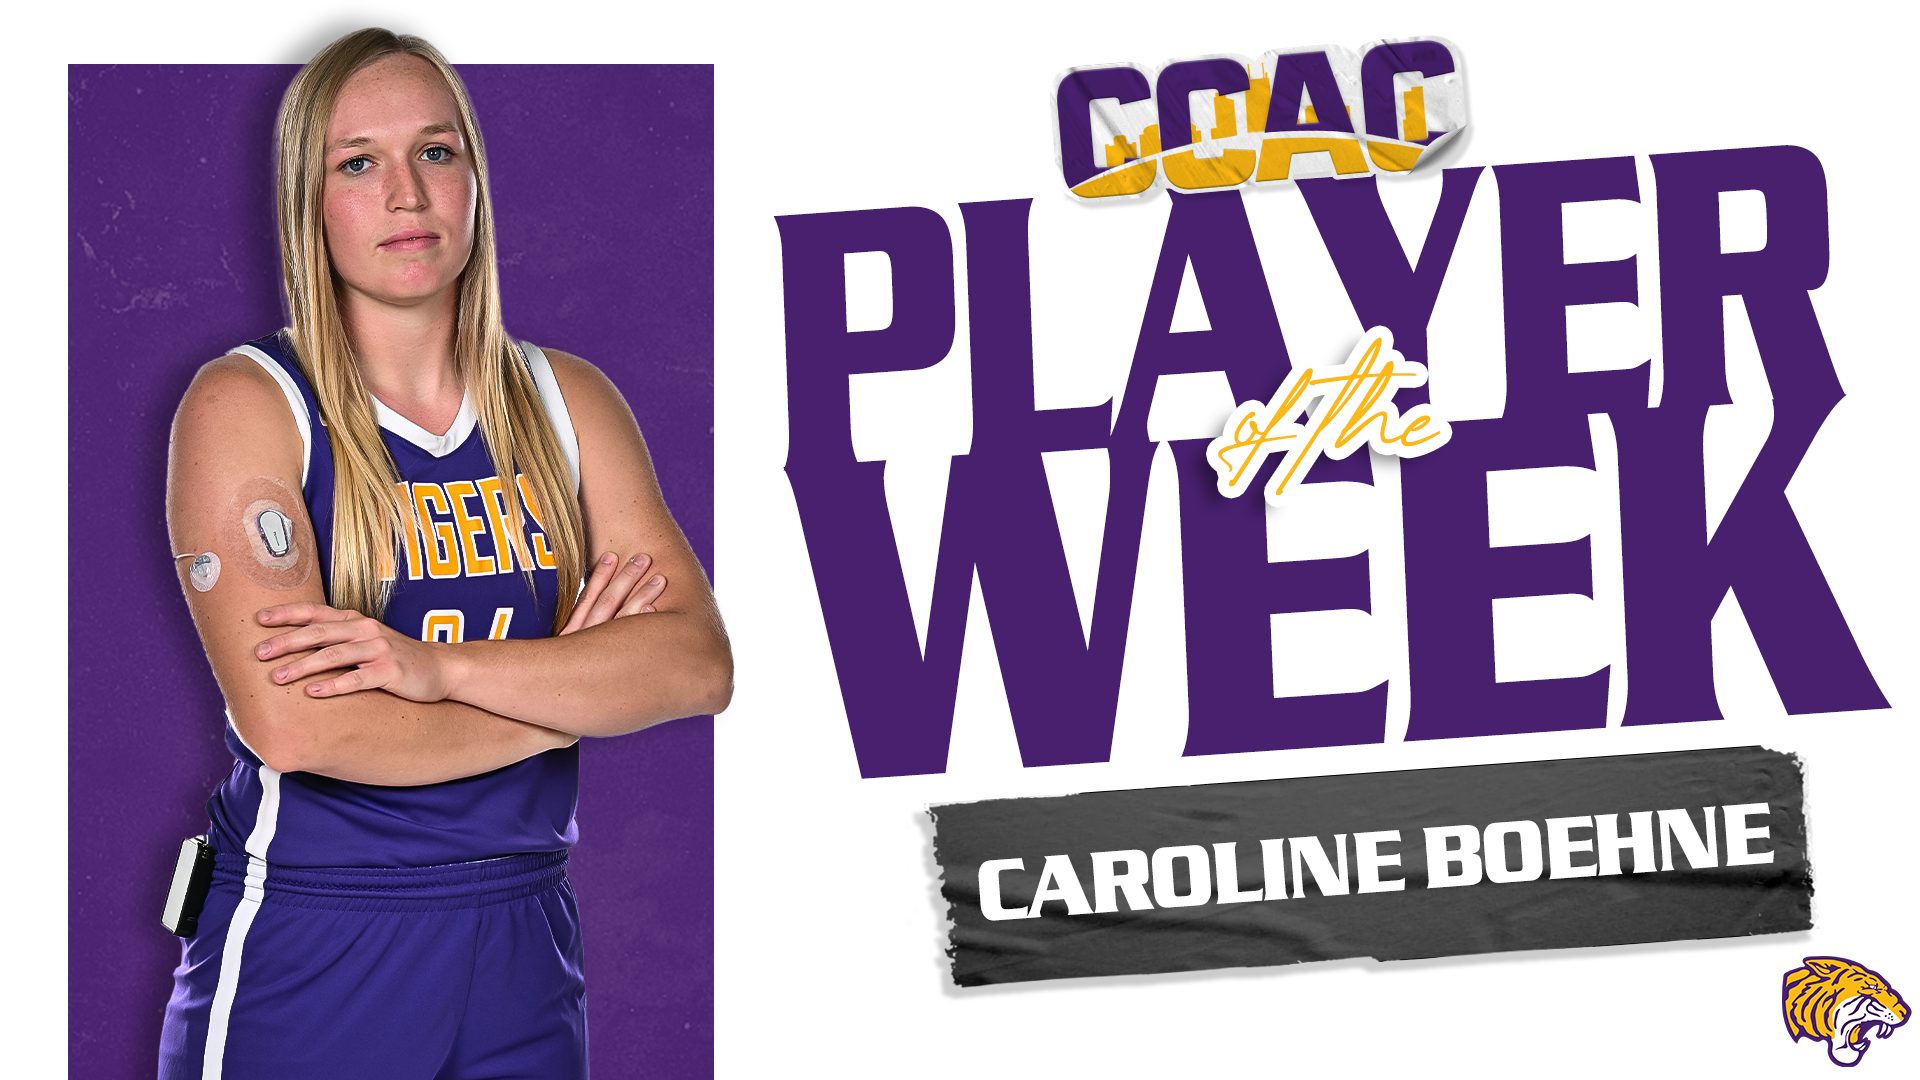 TWO MORE DOUBLE-DOUBLES NETS BOEHNE CCAC PLAYER OF THE WEEK HONORS